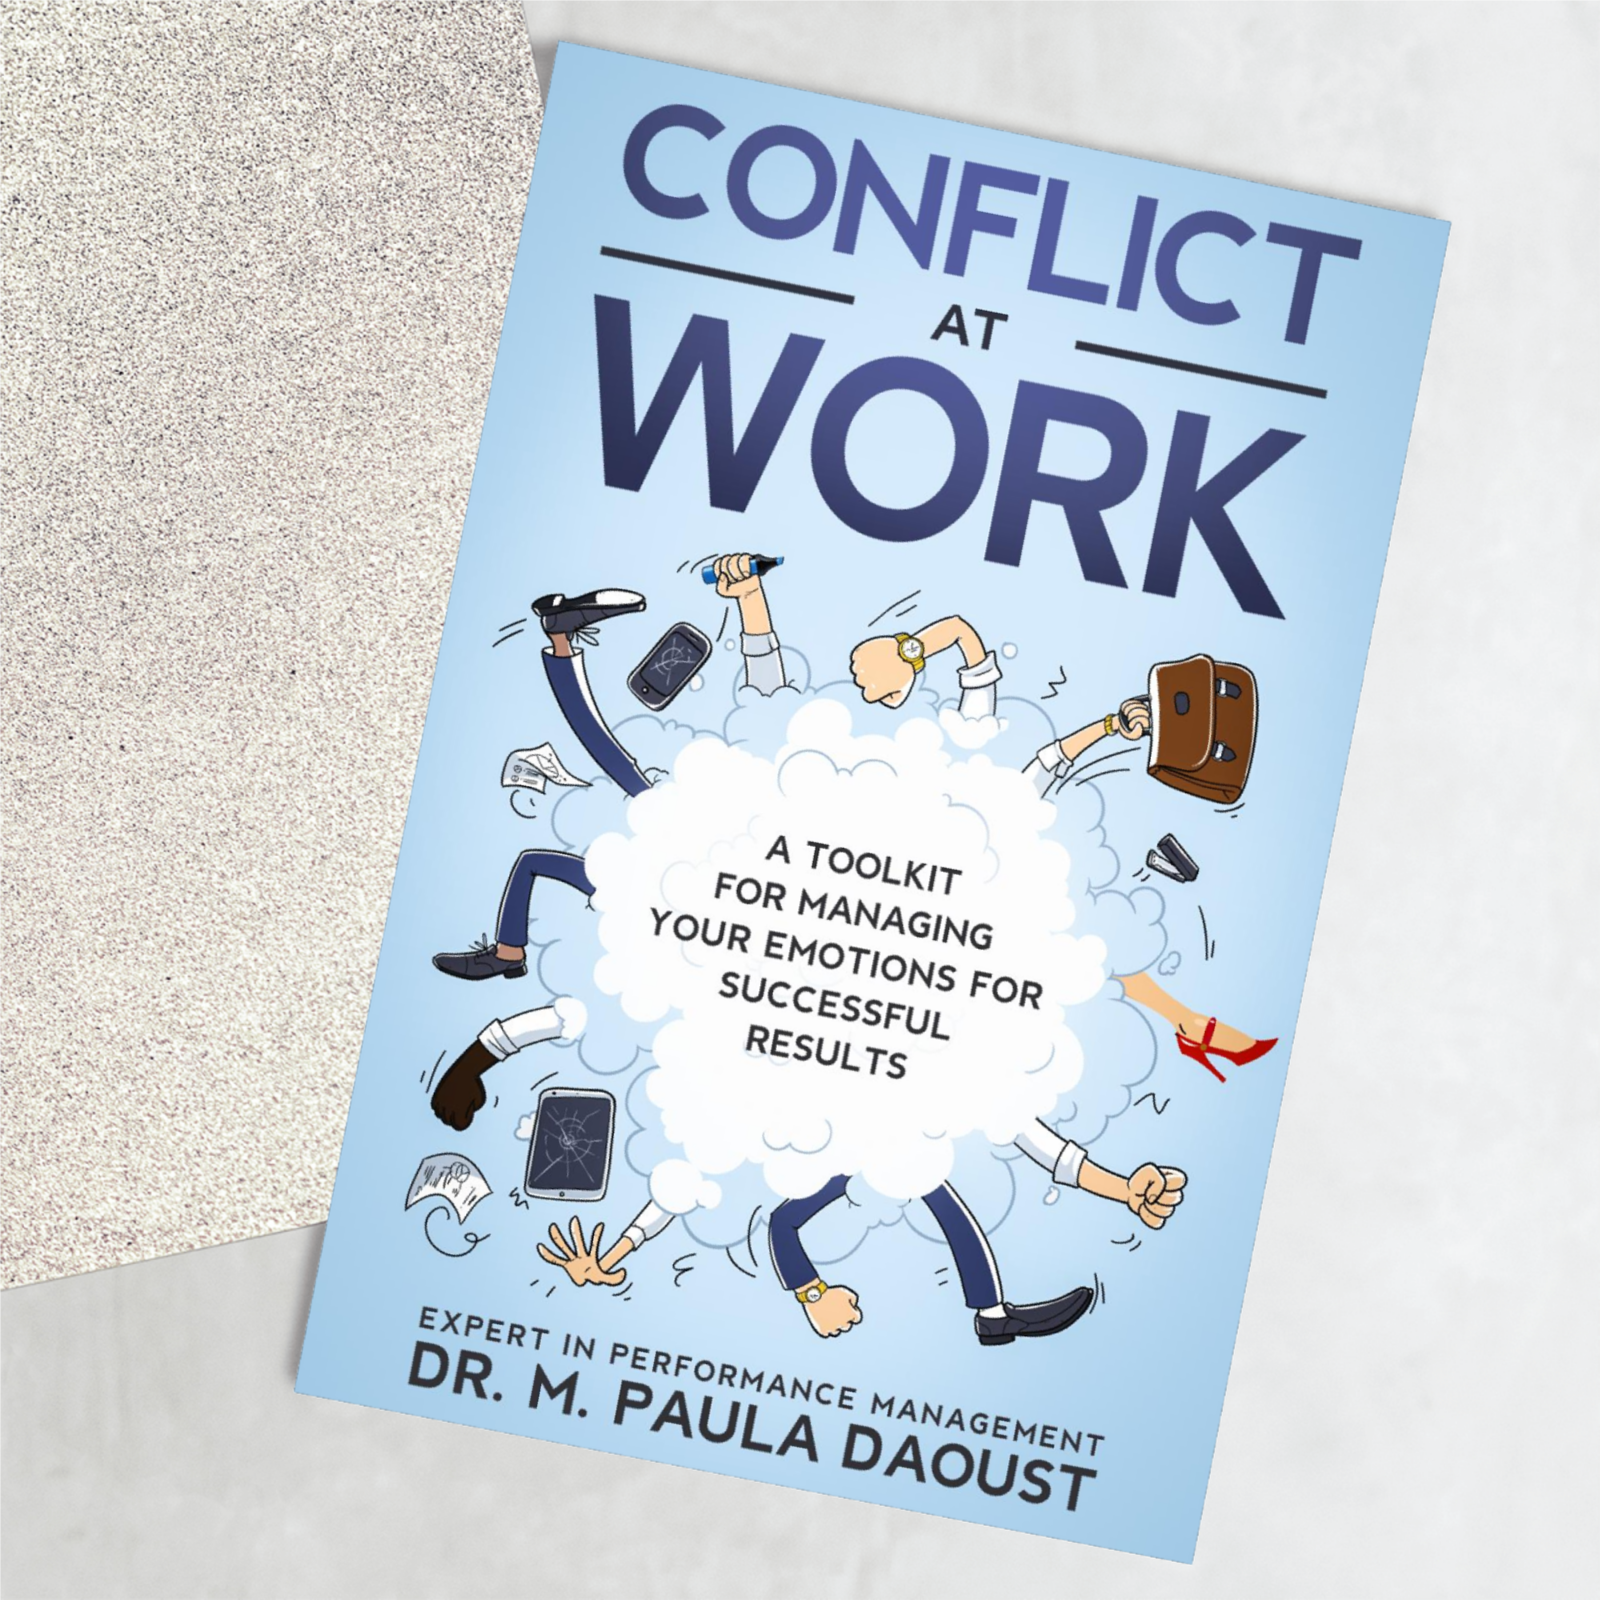 conflict at work